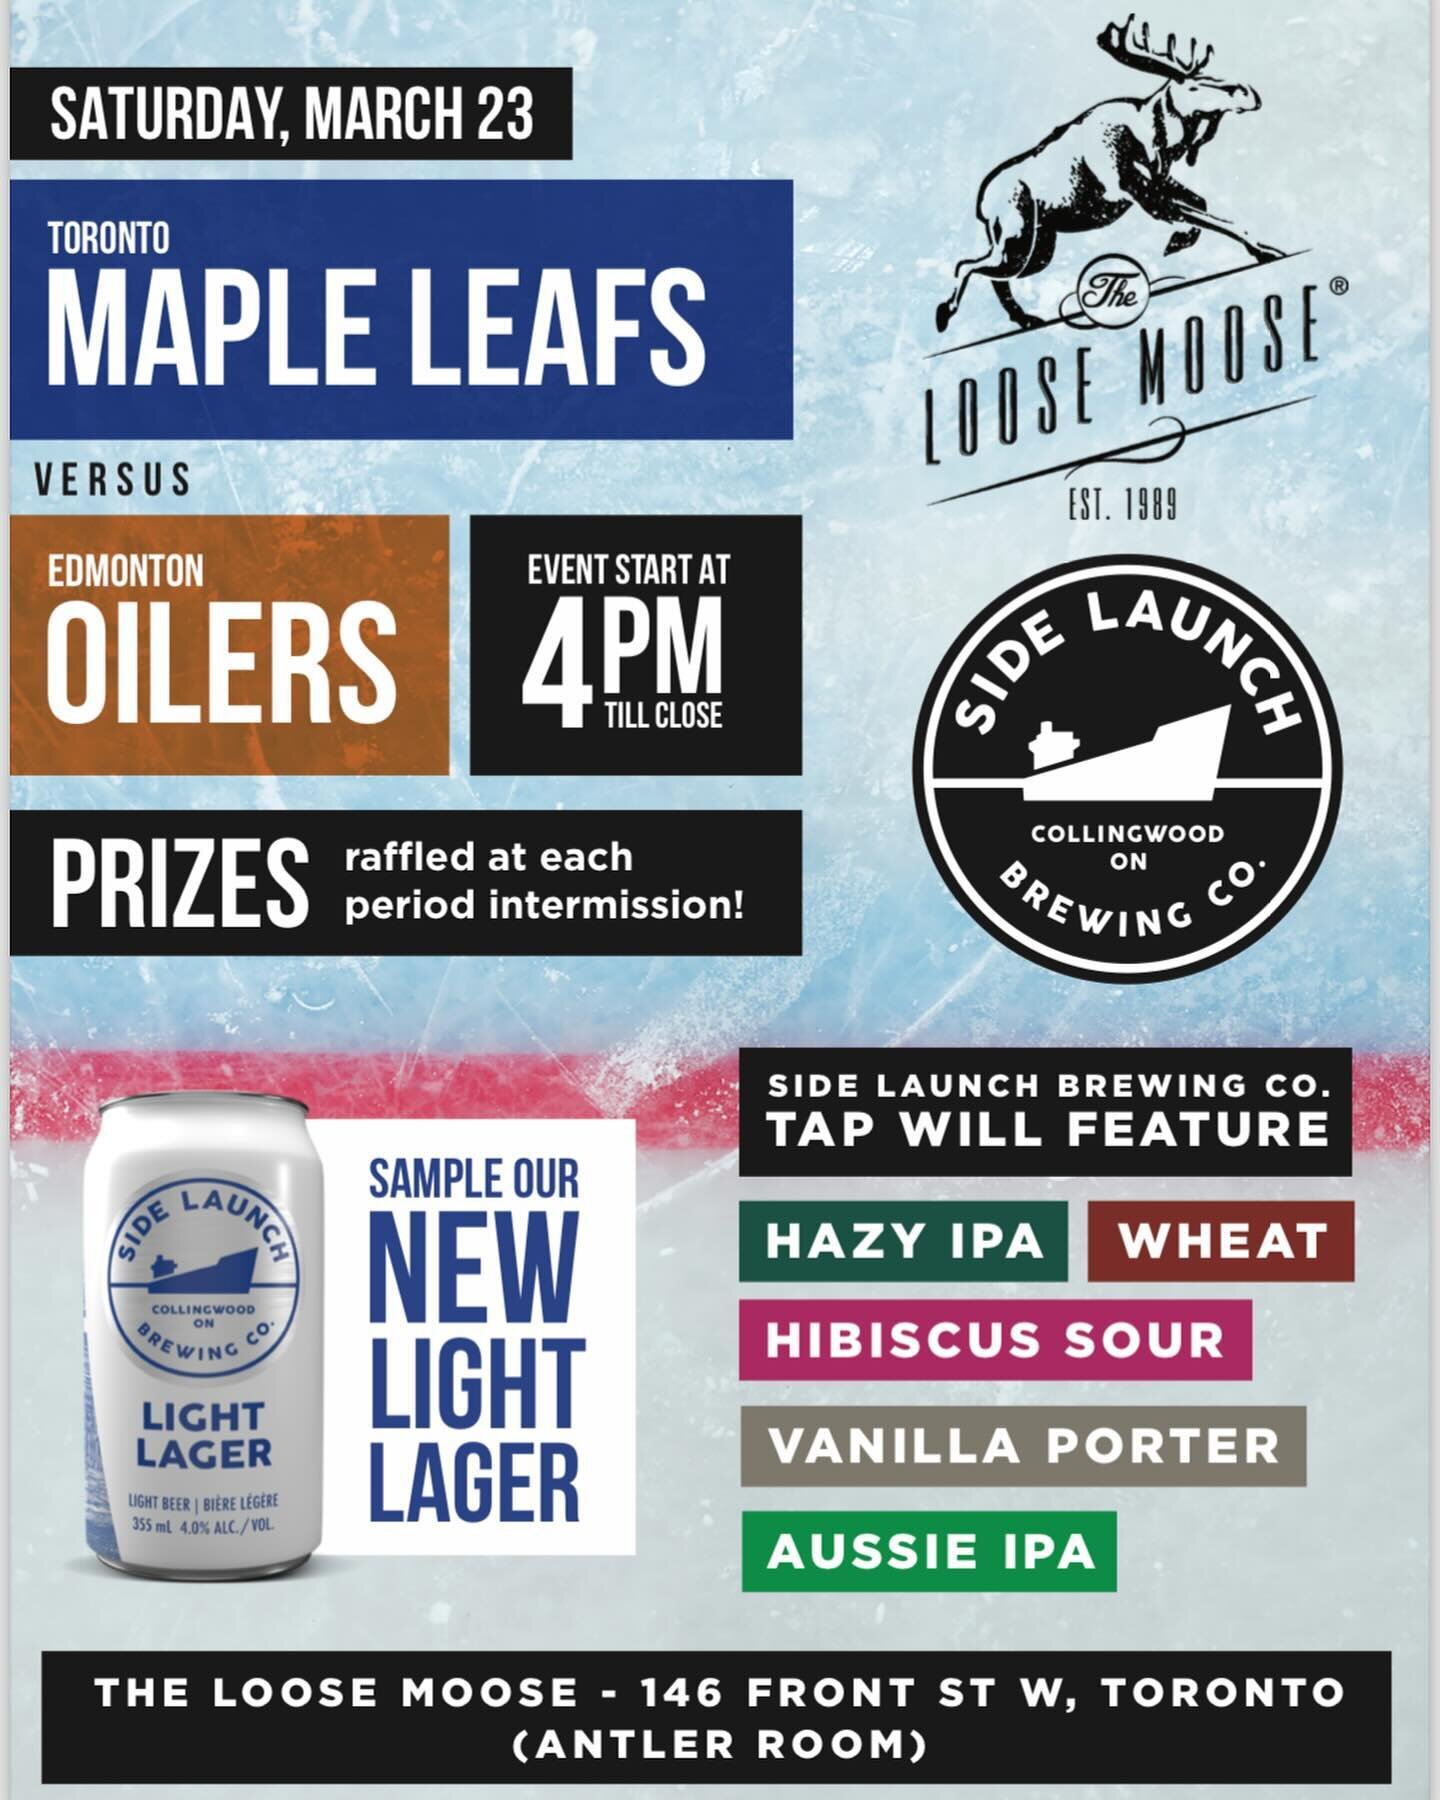 @loosemooseto today for some @sidelaunch and some @mapleleafs. See you at 4pm.